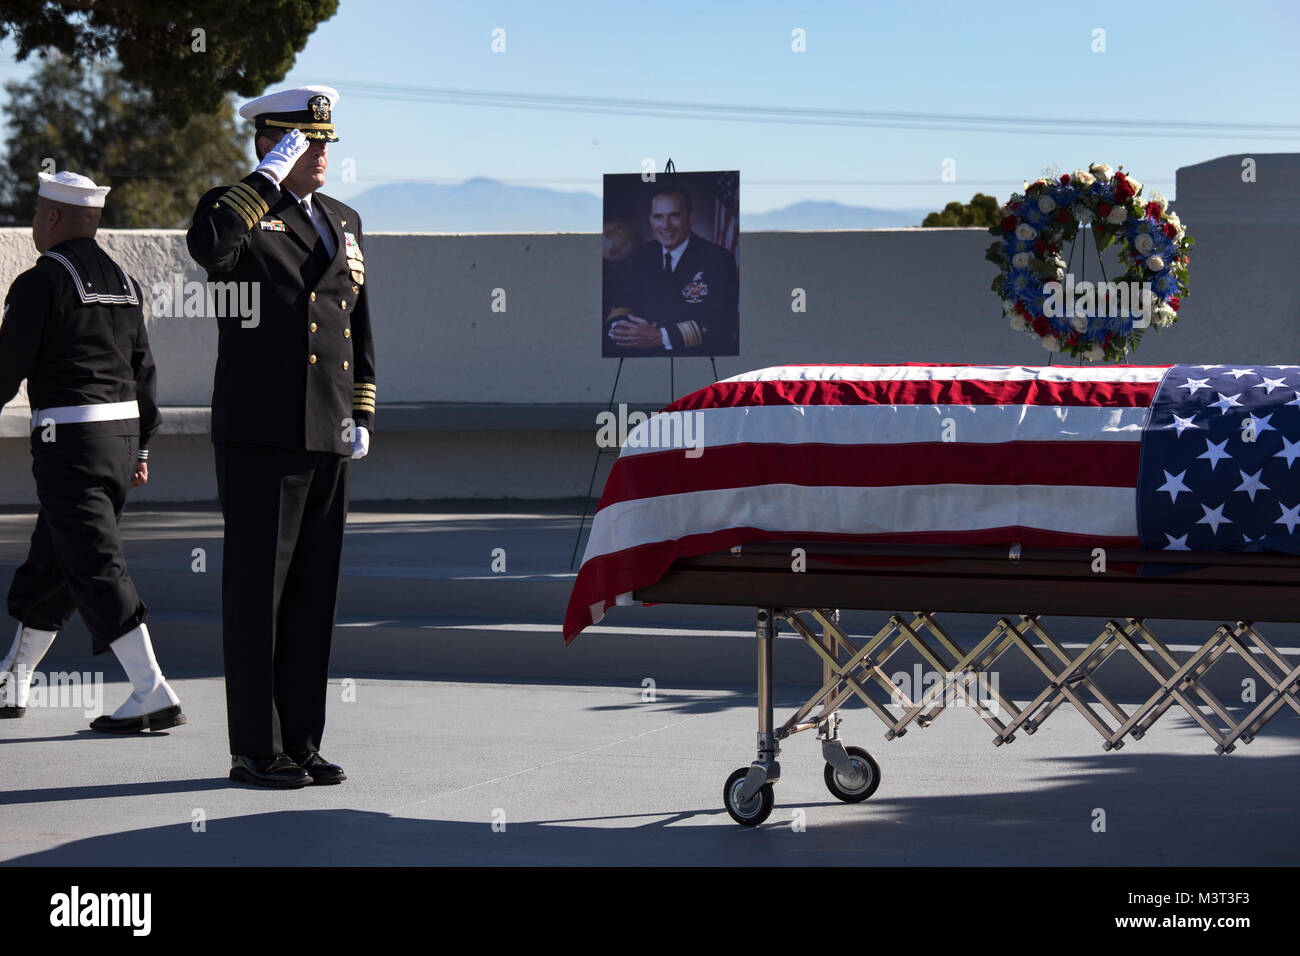 170213-N-PJ969-0093  SAN DIEGO (Feb. 13, 2017) Capt. Cory Cathcart, force chaplain of Naval Special Warfare Command, salutes the casket of retired Rear Adm. (SEAL) Richard Lyon during a memorial service at Fort Rosecrans National Cemetery. Lyon passed away Feb. 3, 2017 at the age of 93. He served more that 40 years in the Navy, including tours in World War II and the Korean War and was the first SEAL admiral. (U.S. Navy photo by Petty Officer 2nd Class Abe McNatt/Released) 170213-N-PJ969-0093 by Photograph Curator Stock Photo